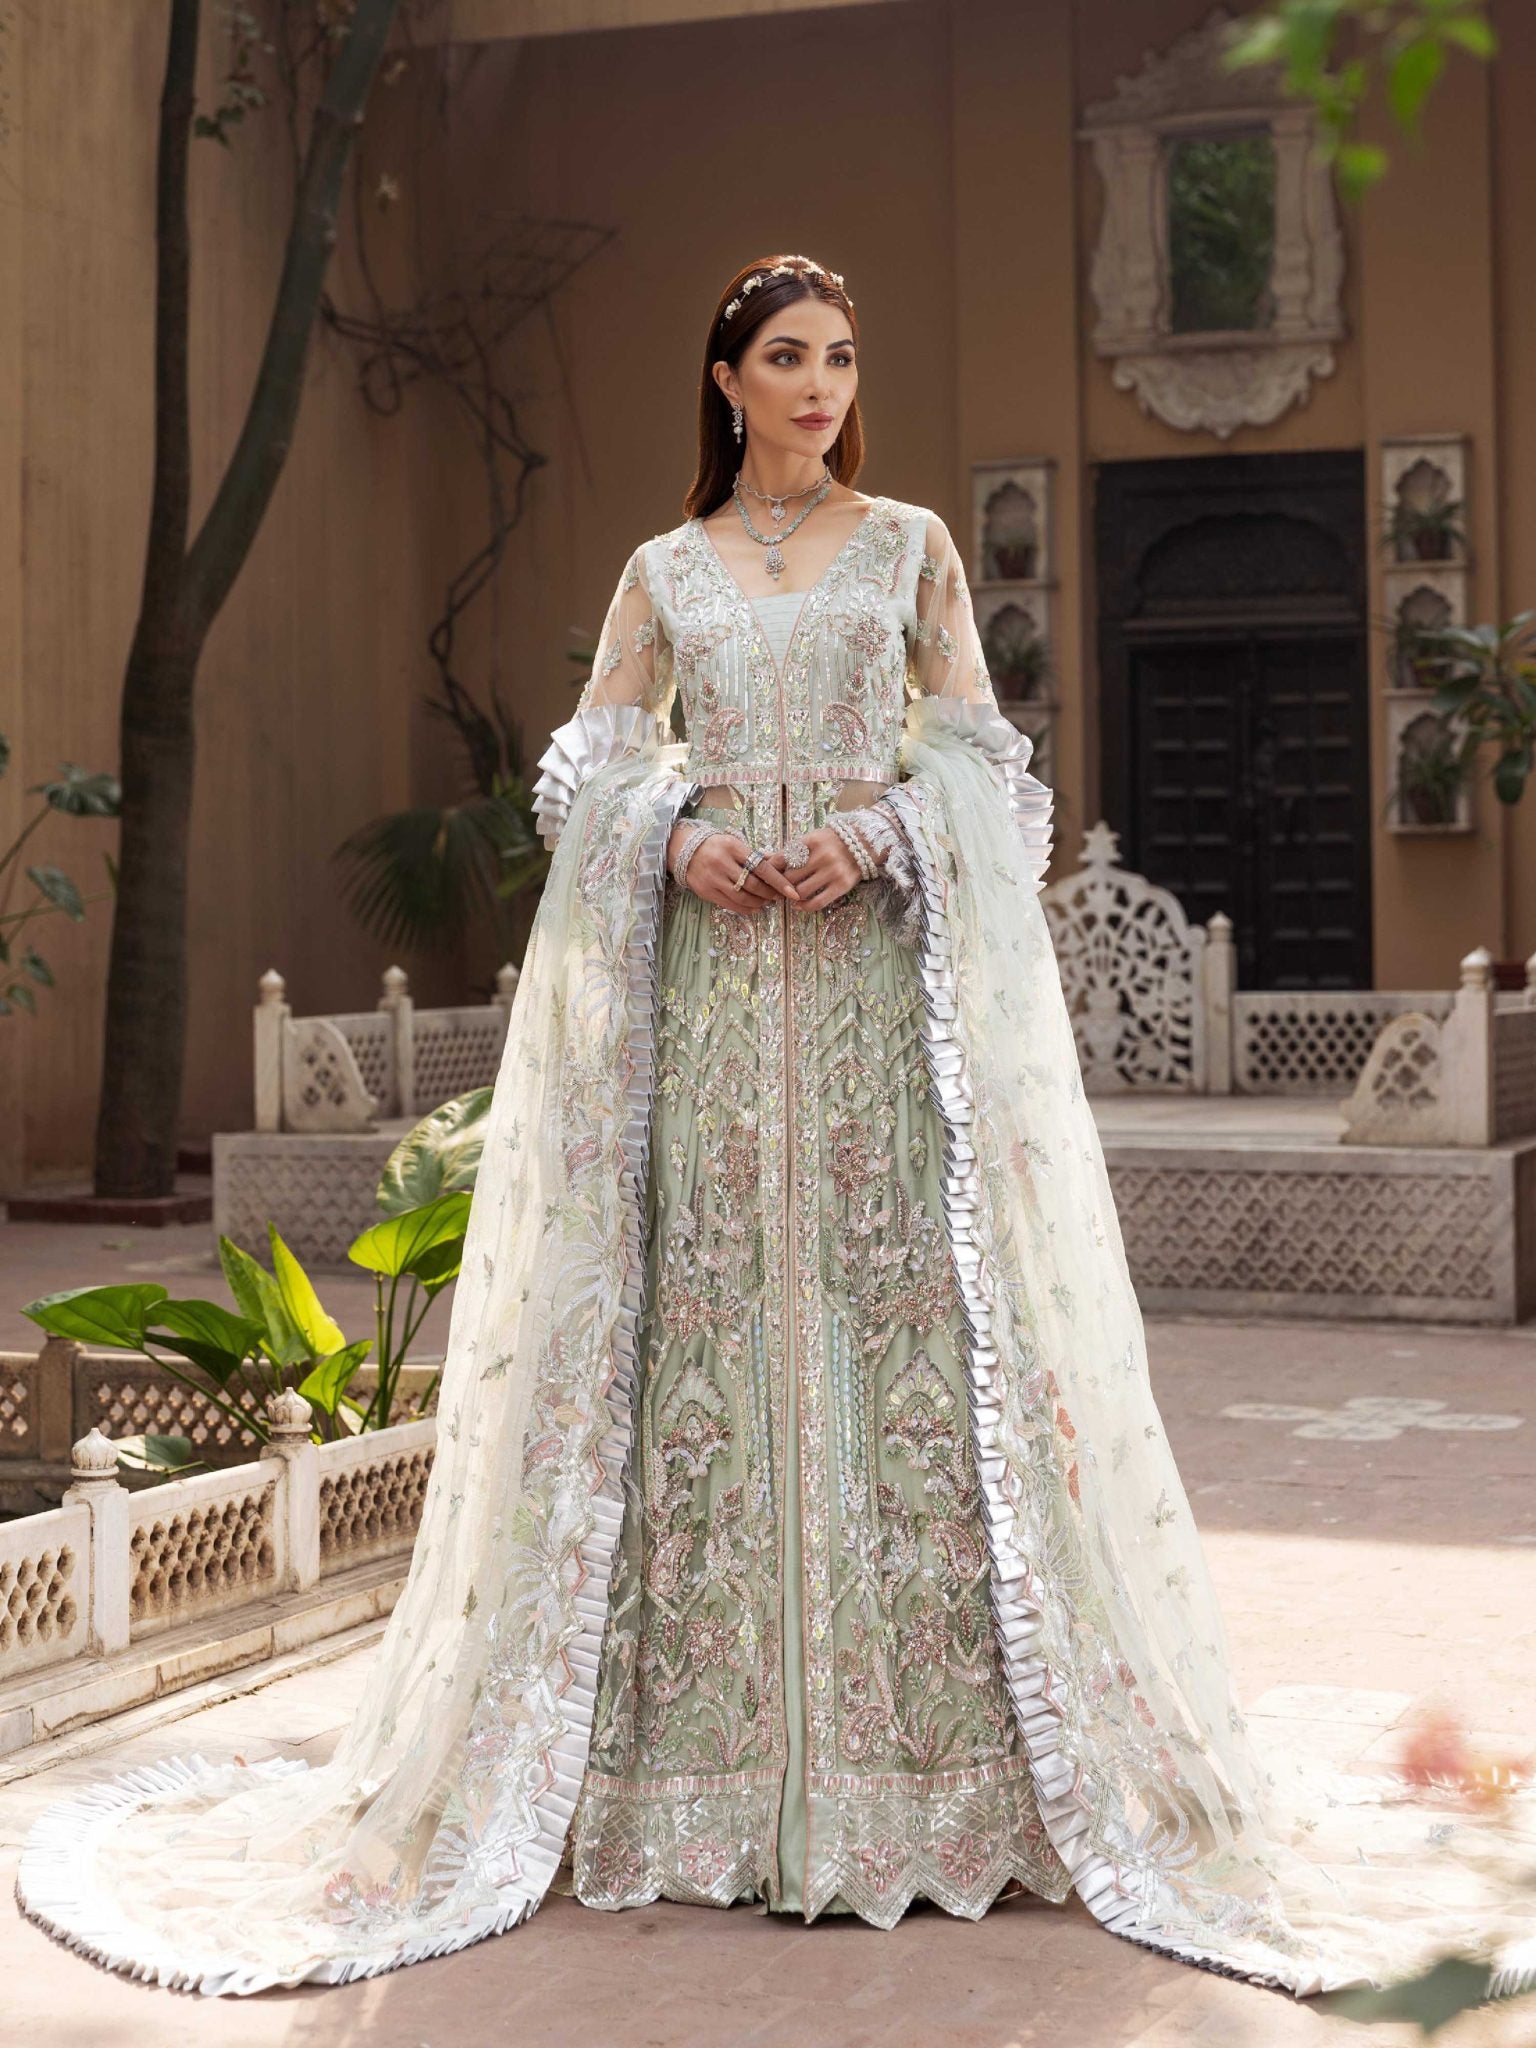 Mahermah by Eman Adeel Unstitched Bridal Edition'2 Collection'2022-MB-203